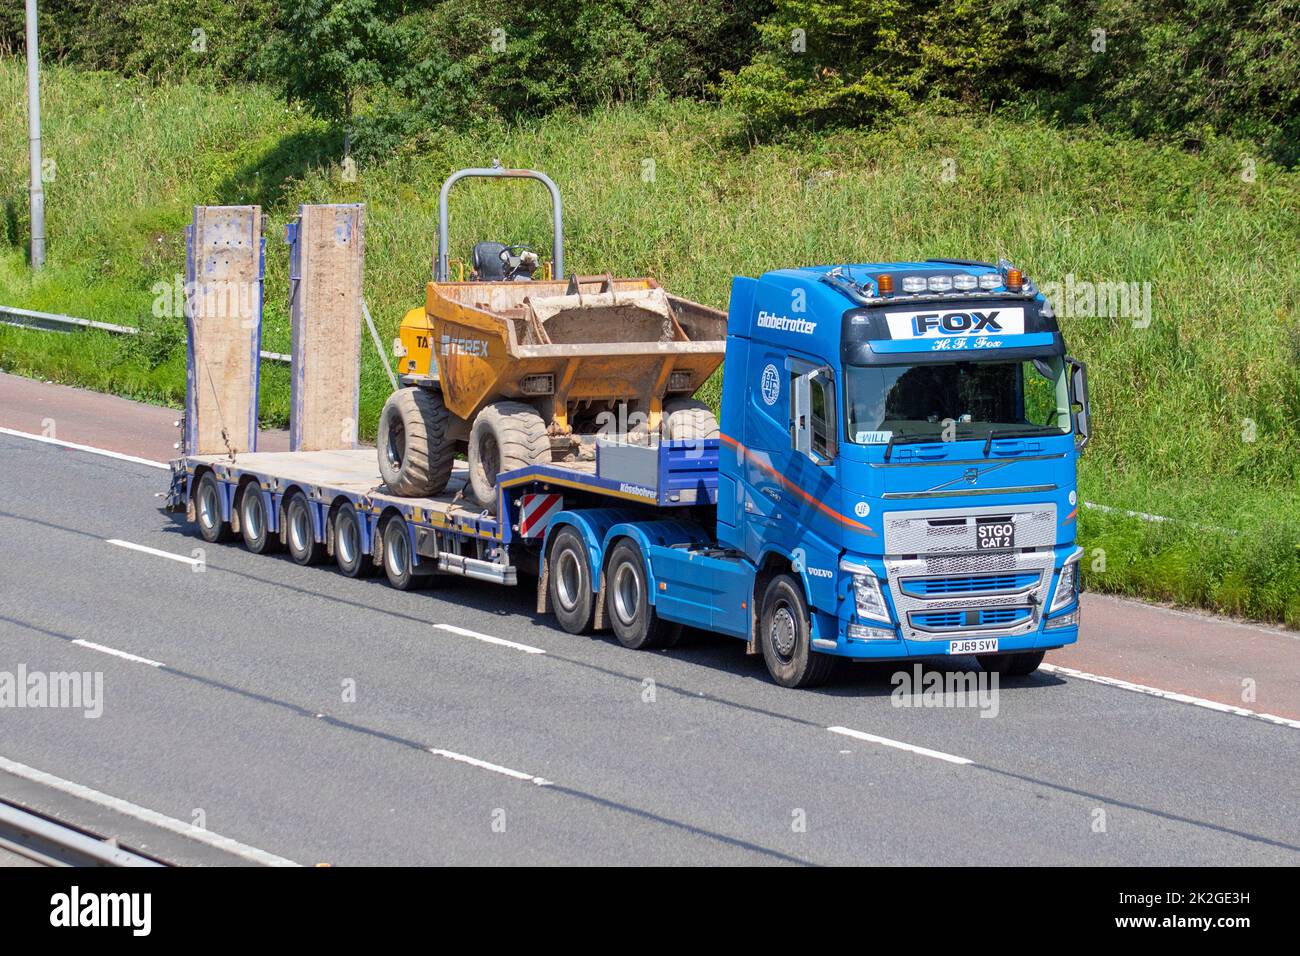 FOX BROTHERS Haulage delivery trucks, lorry, transportation, truck, cargo carrier, Volvo vehicle, European commercial transport, close industry, M61 at Manchester, UK Stock Photo